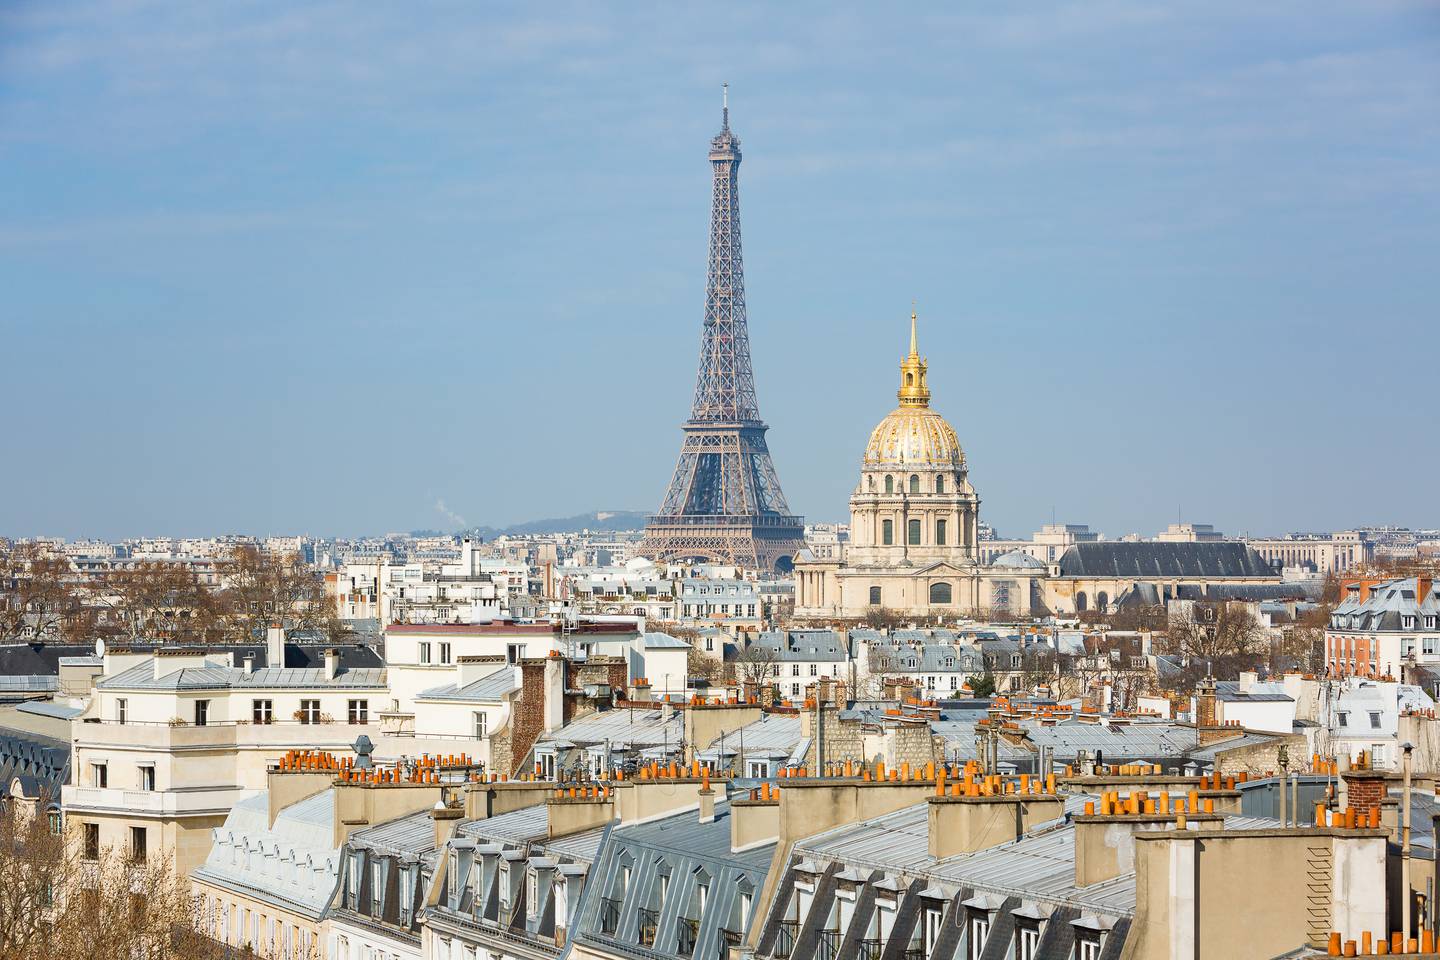 Enjoy views of Paris's Eiffel Tower when staying at Hotel Lutetia, part of The Set collection. Photo: Hotel Lutetia